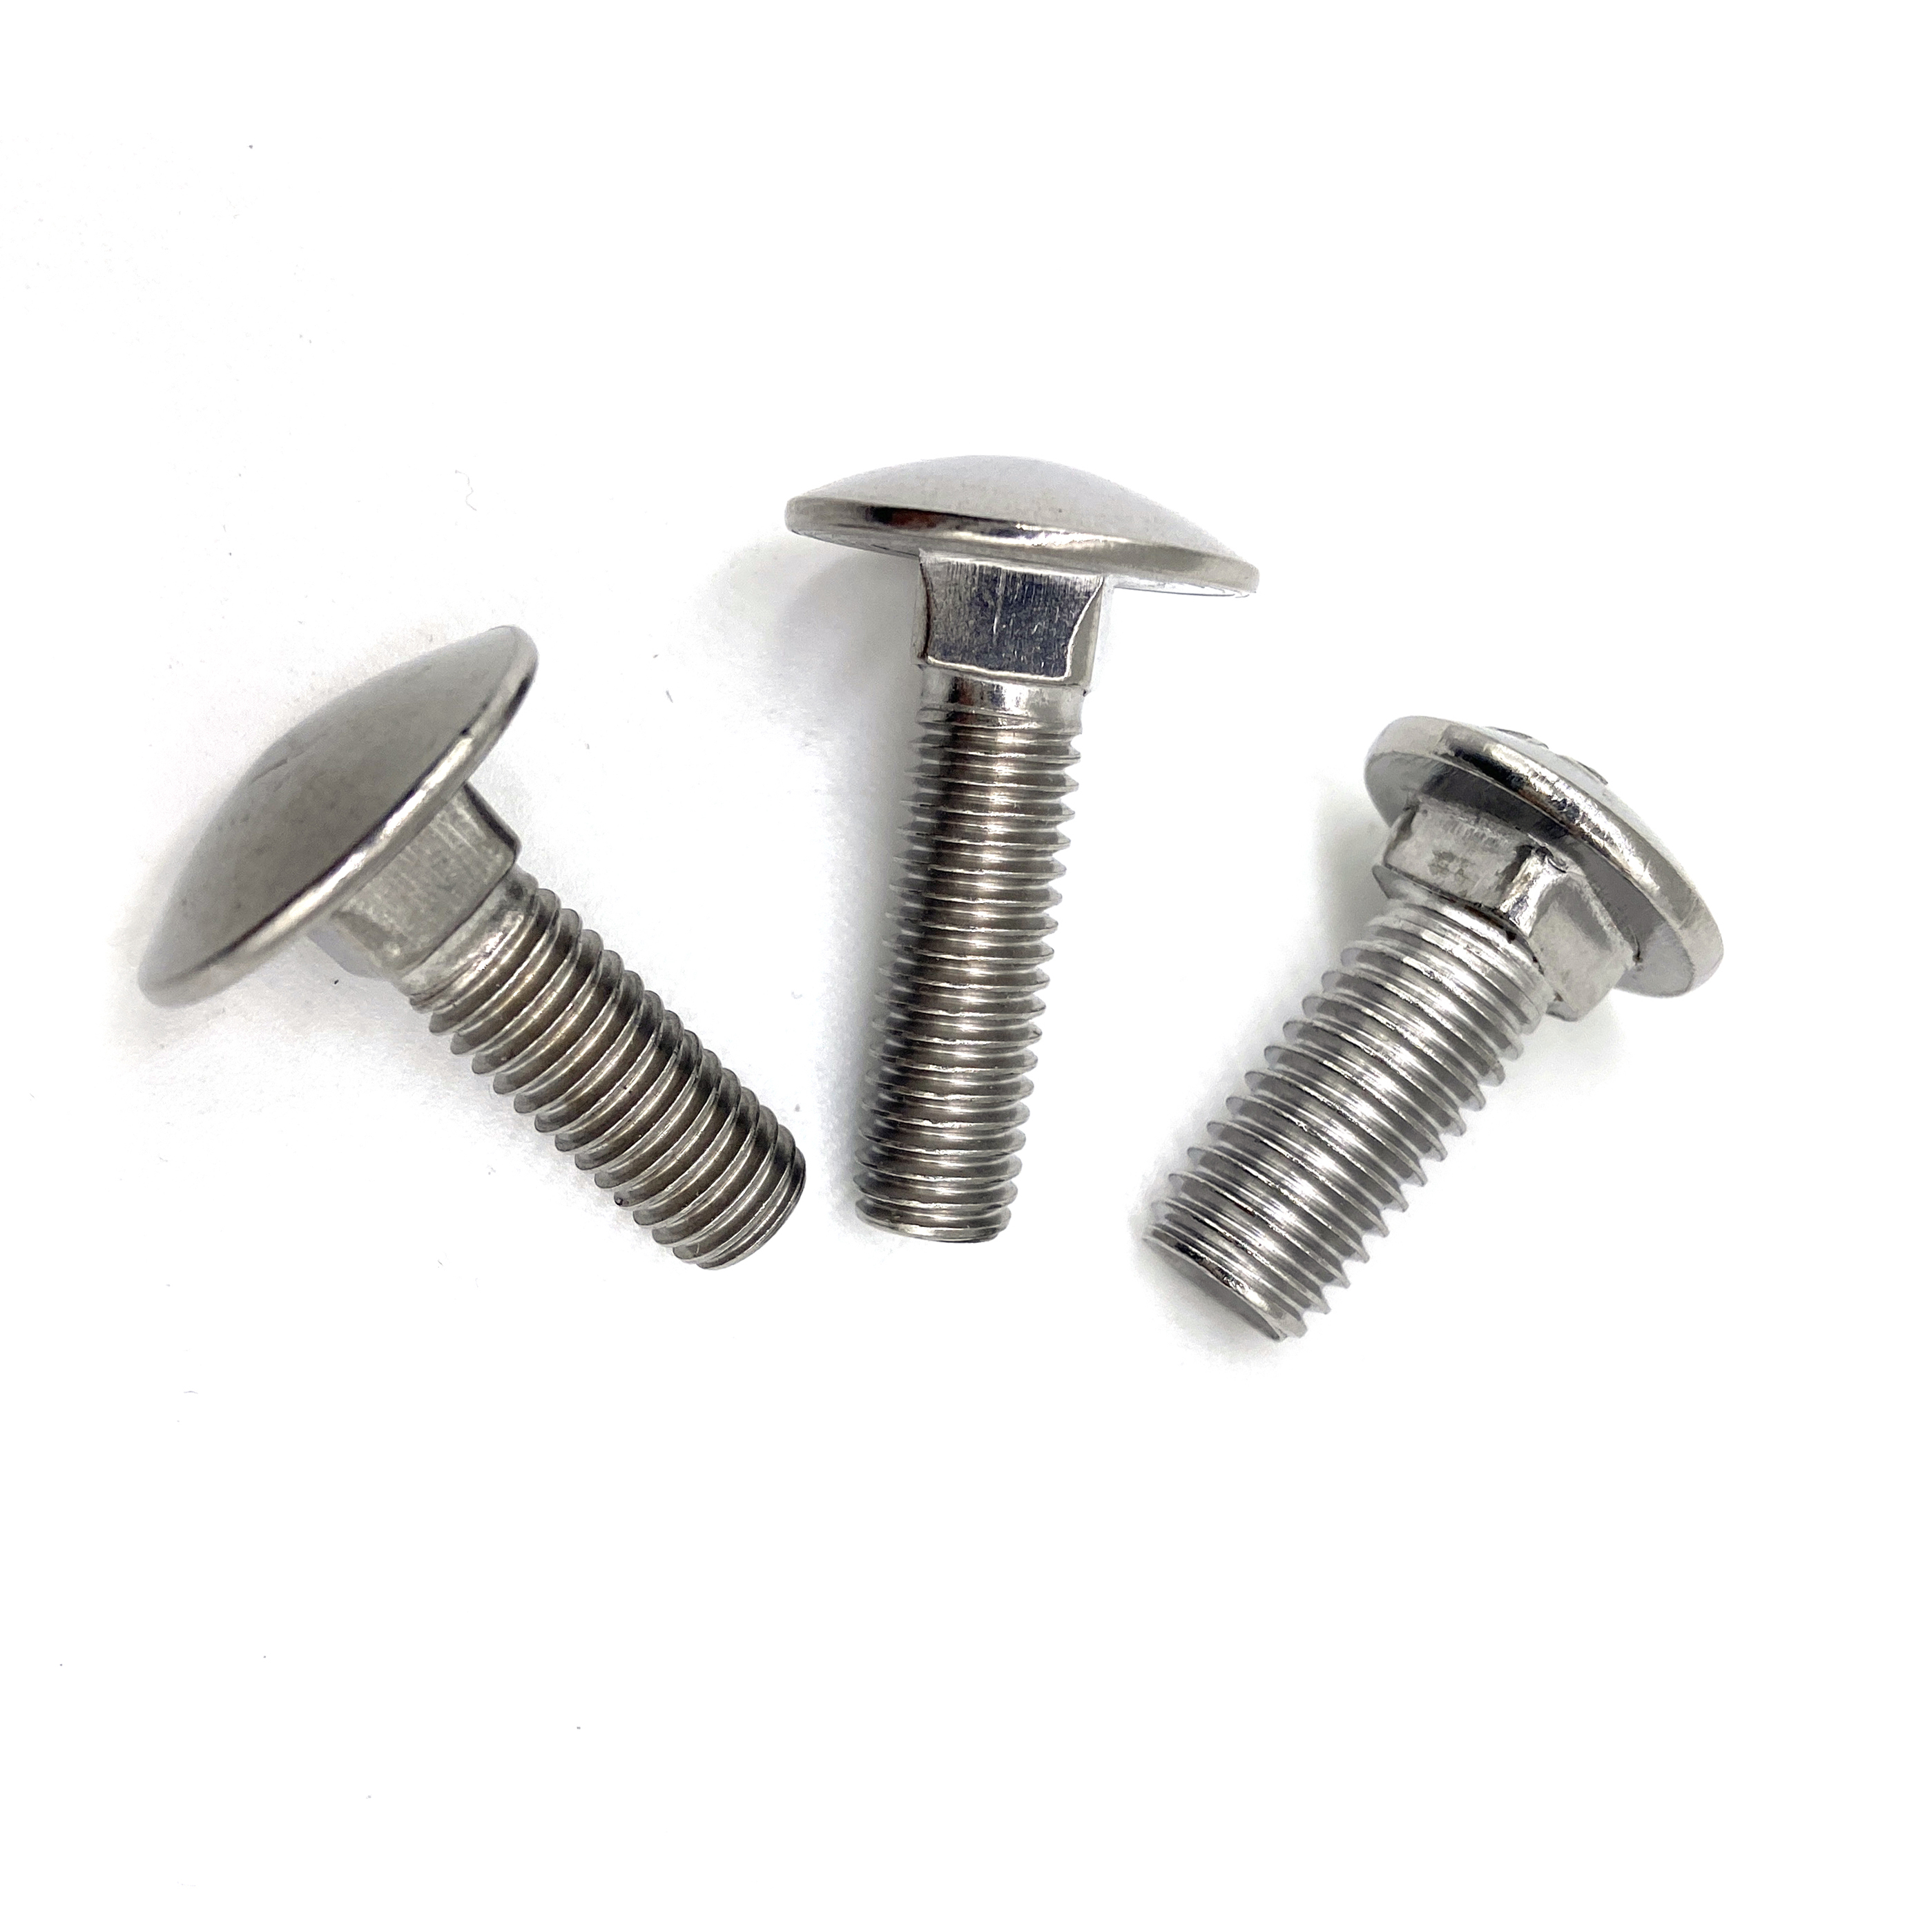 M8-1.25 Metric 304 Stainless Steel Carriage Bolts Round Head Square Neck Screws 